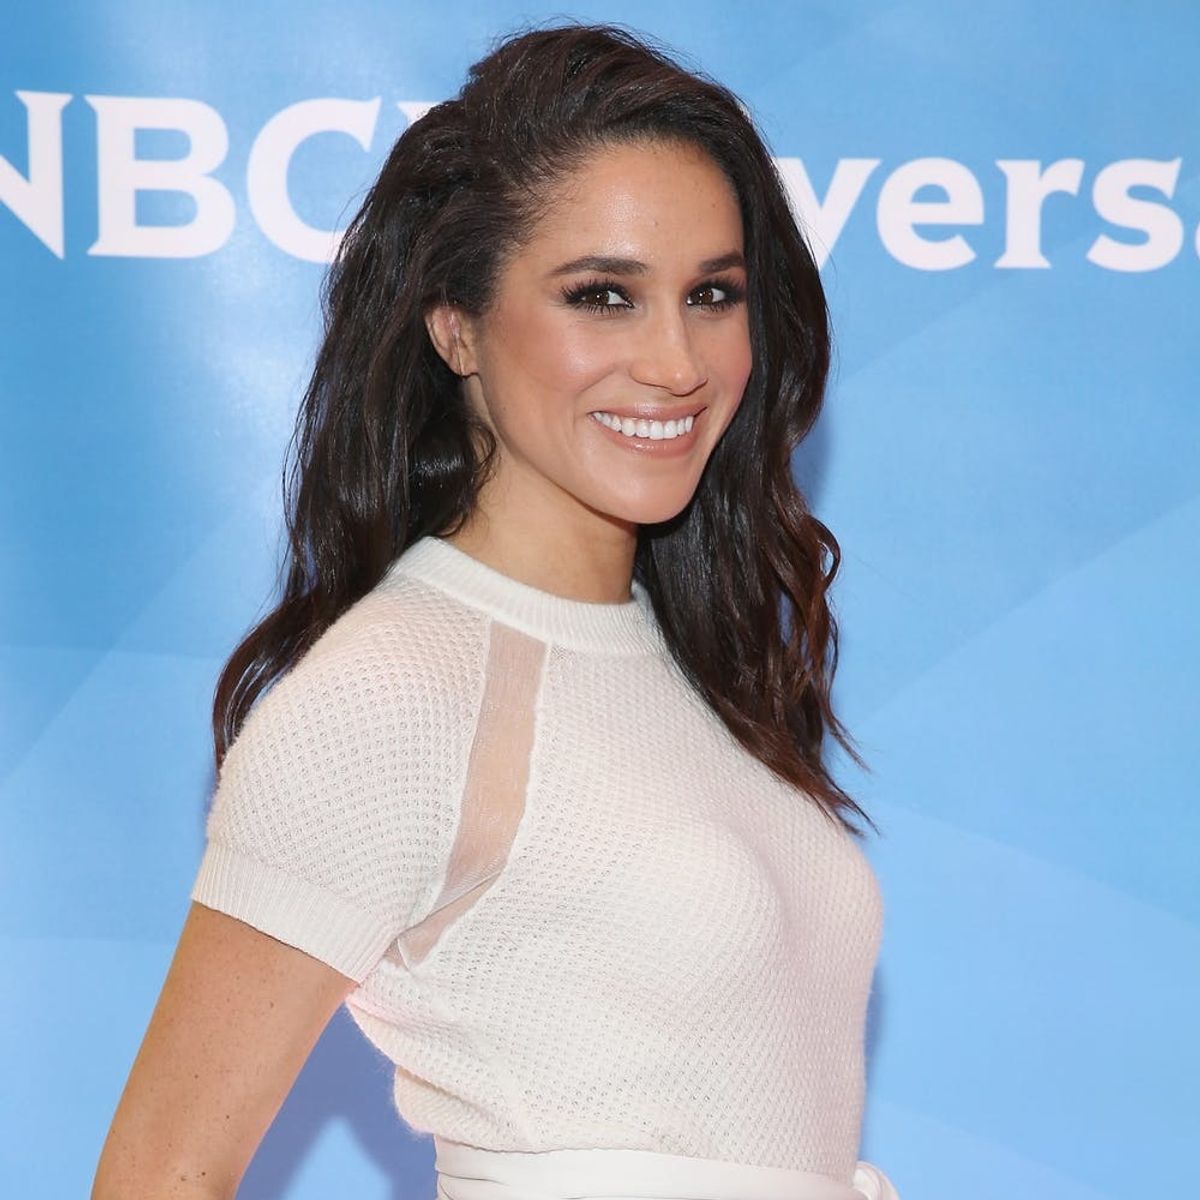 Watch an Old Clip of Meghan Markle Taking (and Failing!) a ‘Britishness’ Quiz